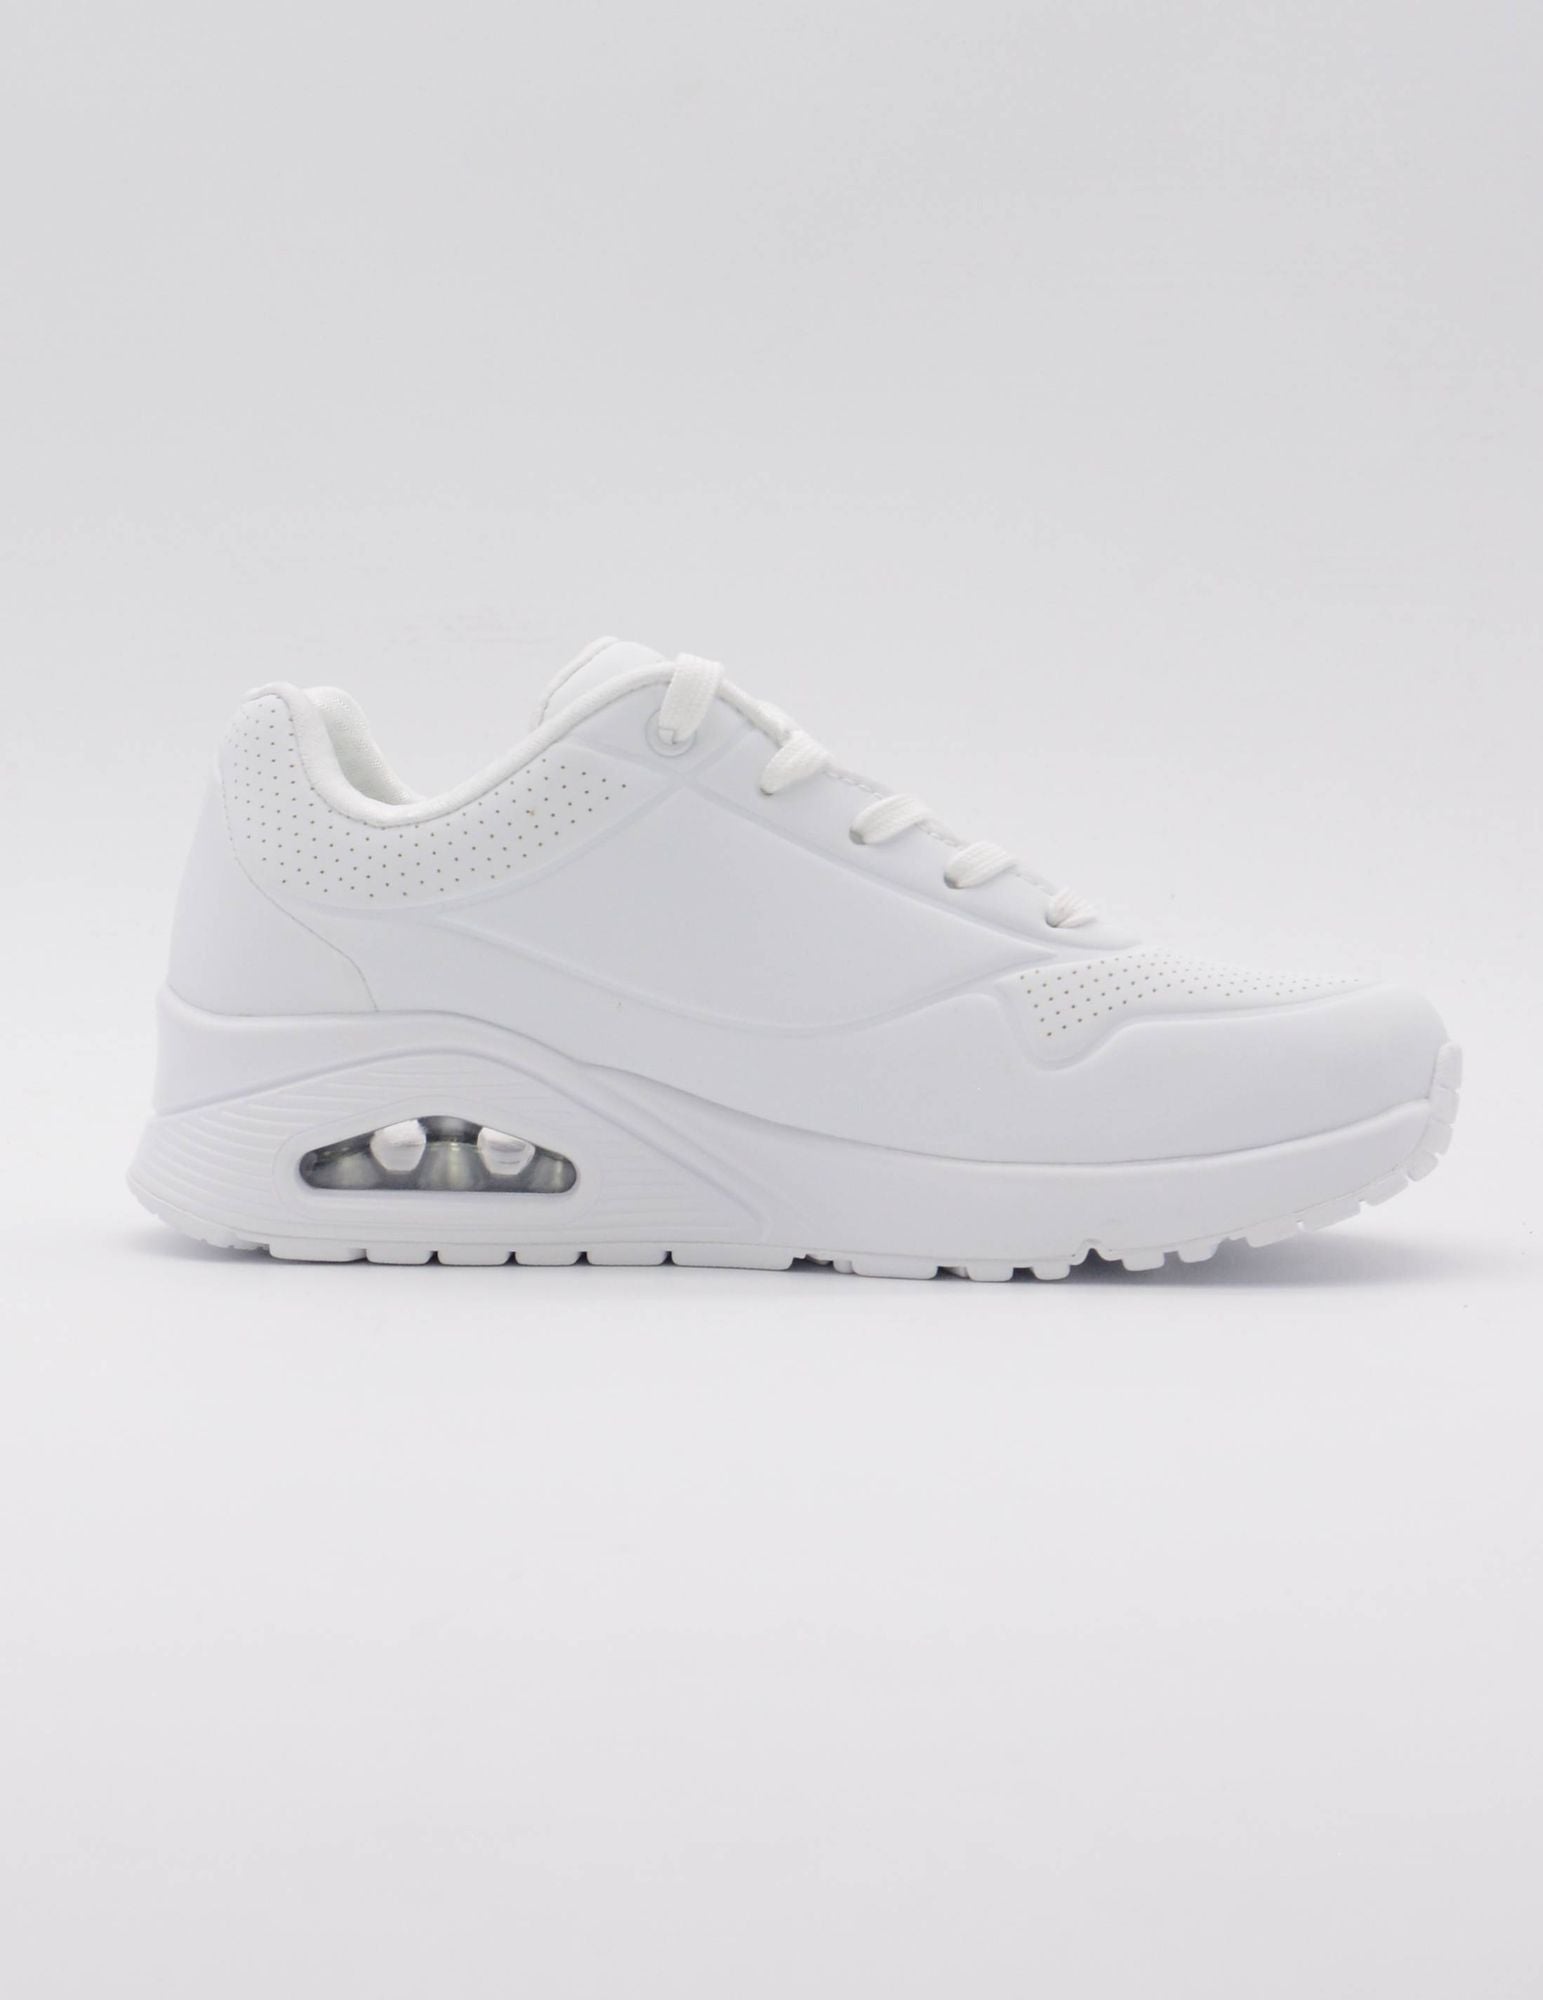 SKECHERS DEPORTIVO Uno - Stand on Air BLANCO